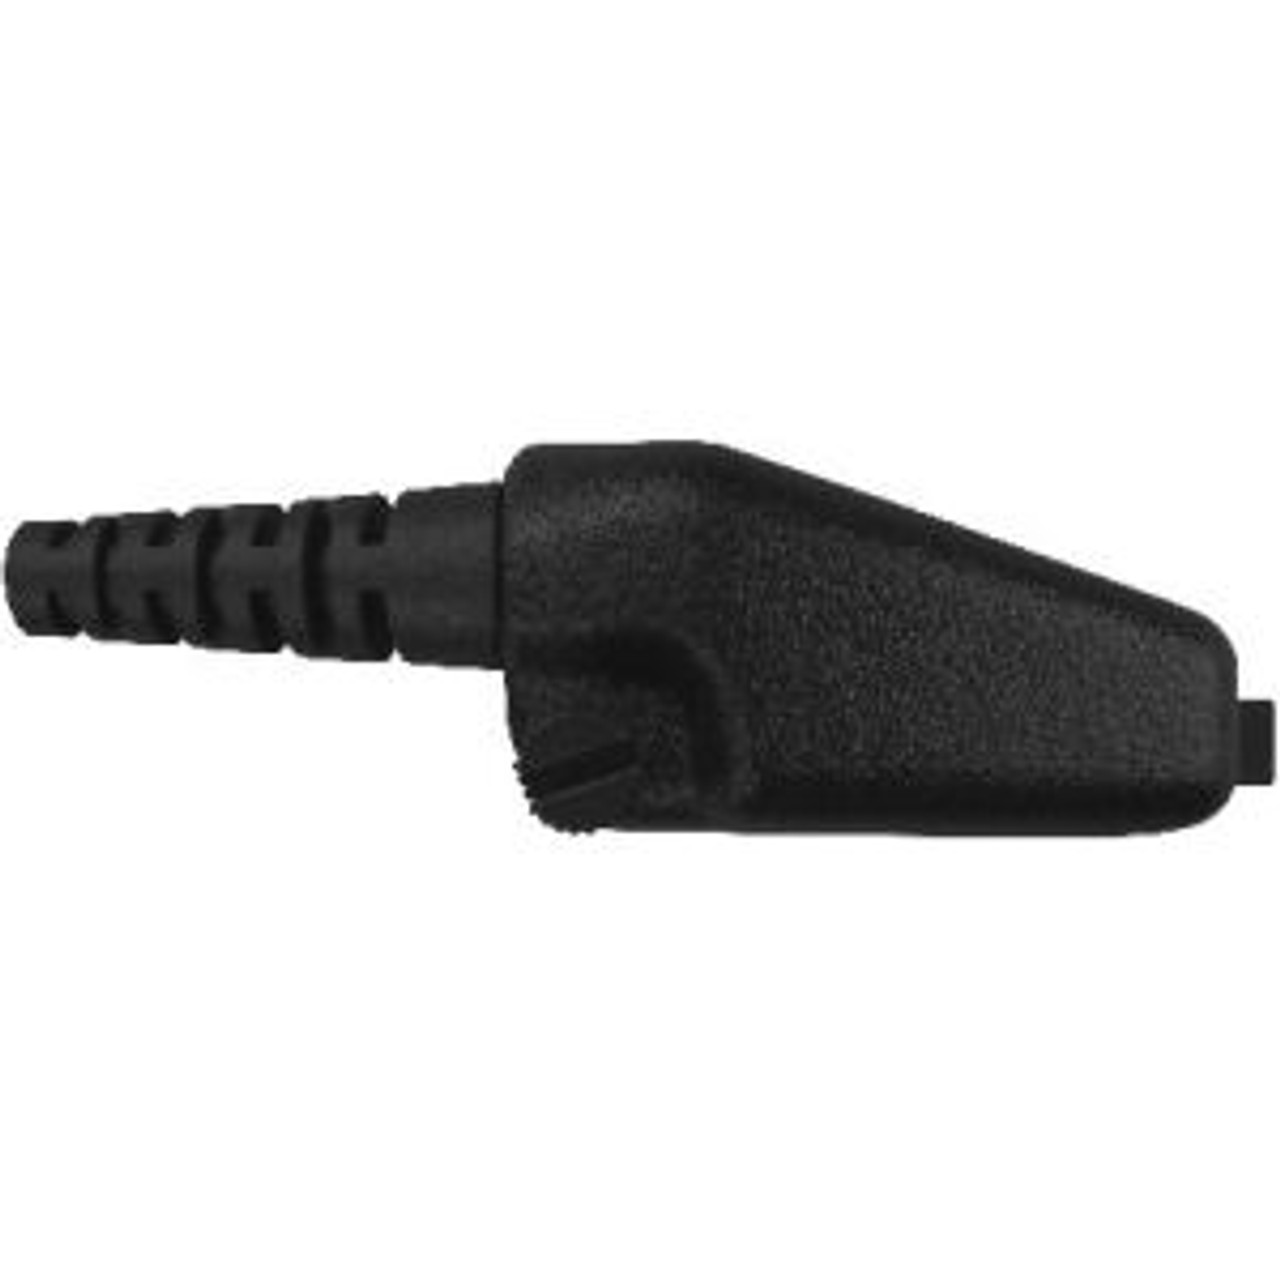 Otto ClearTrak NRX Behind The Head Double Muff Headset For Kenwood TK-380